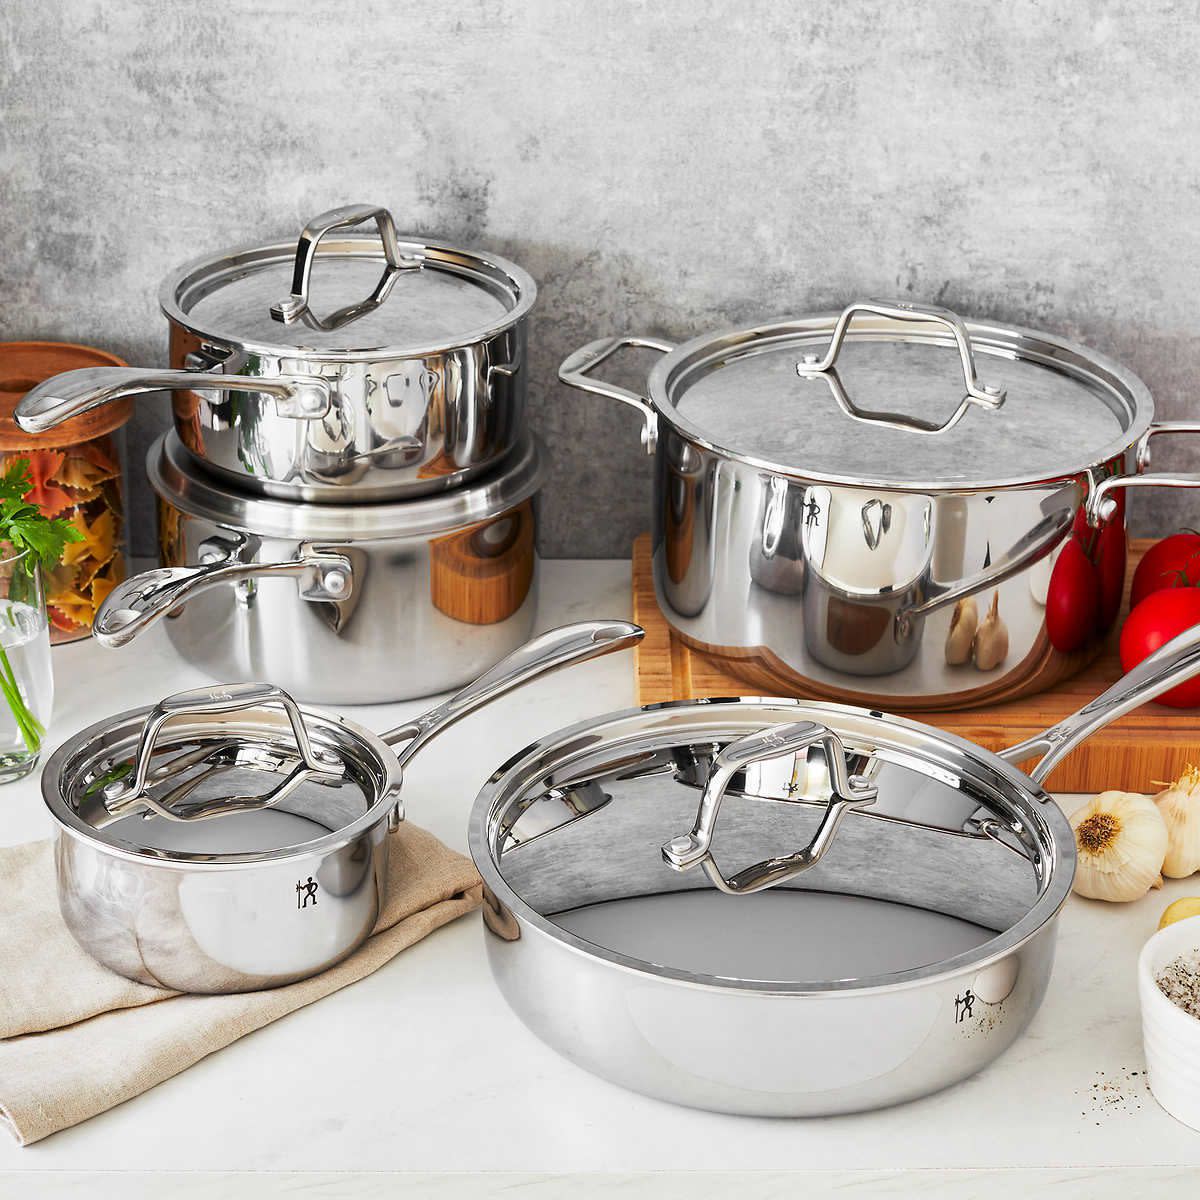 J.A. Henckels RealClad 10-Piece Stainless Steel Cookware Set